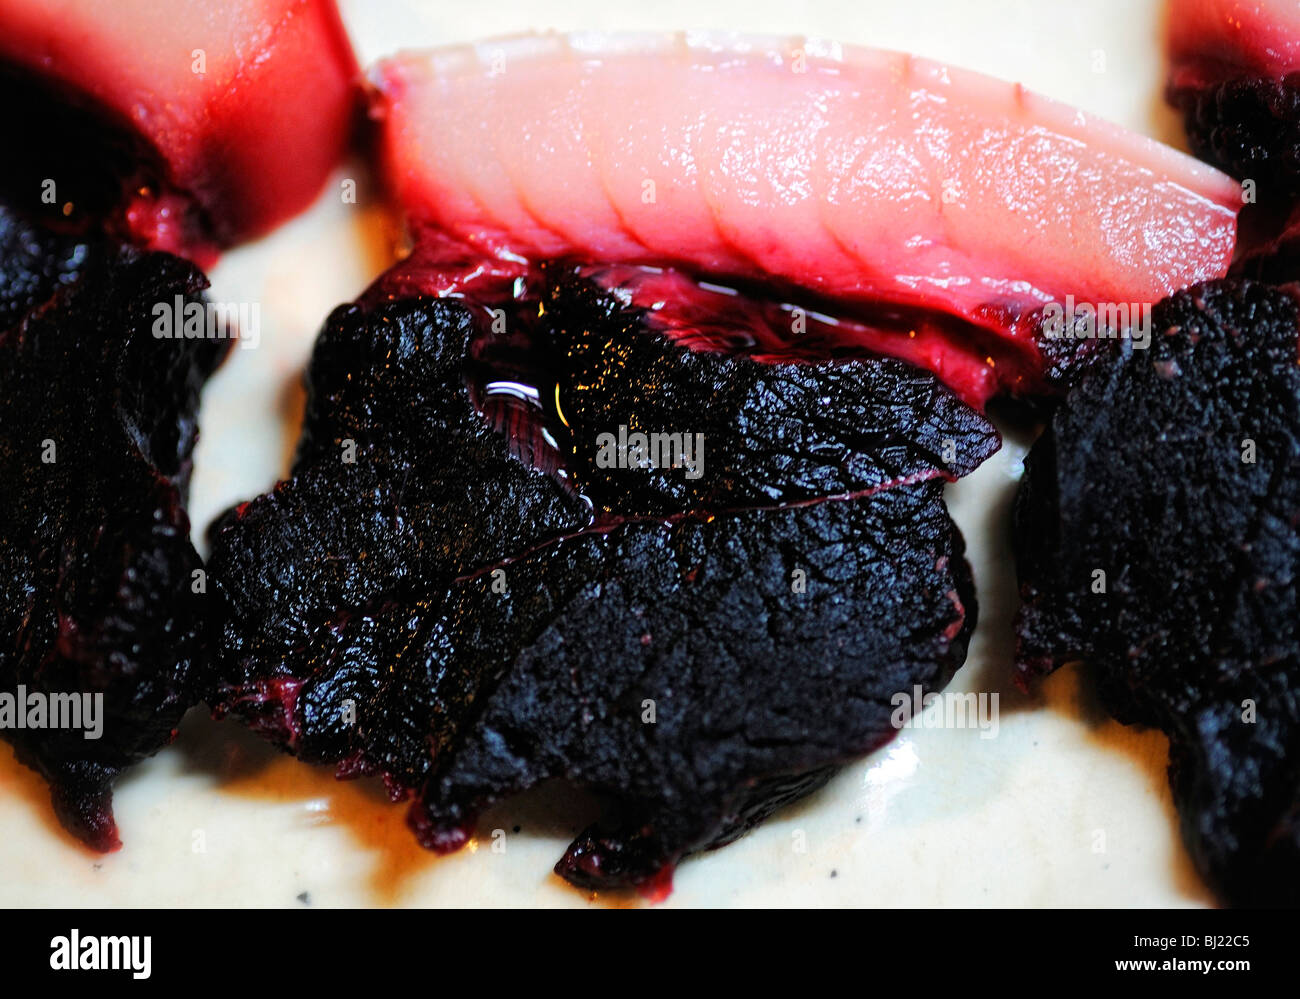 Slices of dolphin meat are arranged on a plate in Japan. Stock Photo